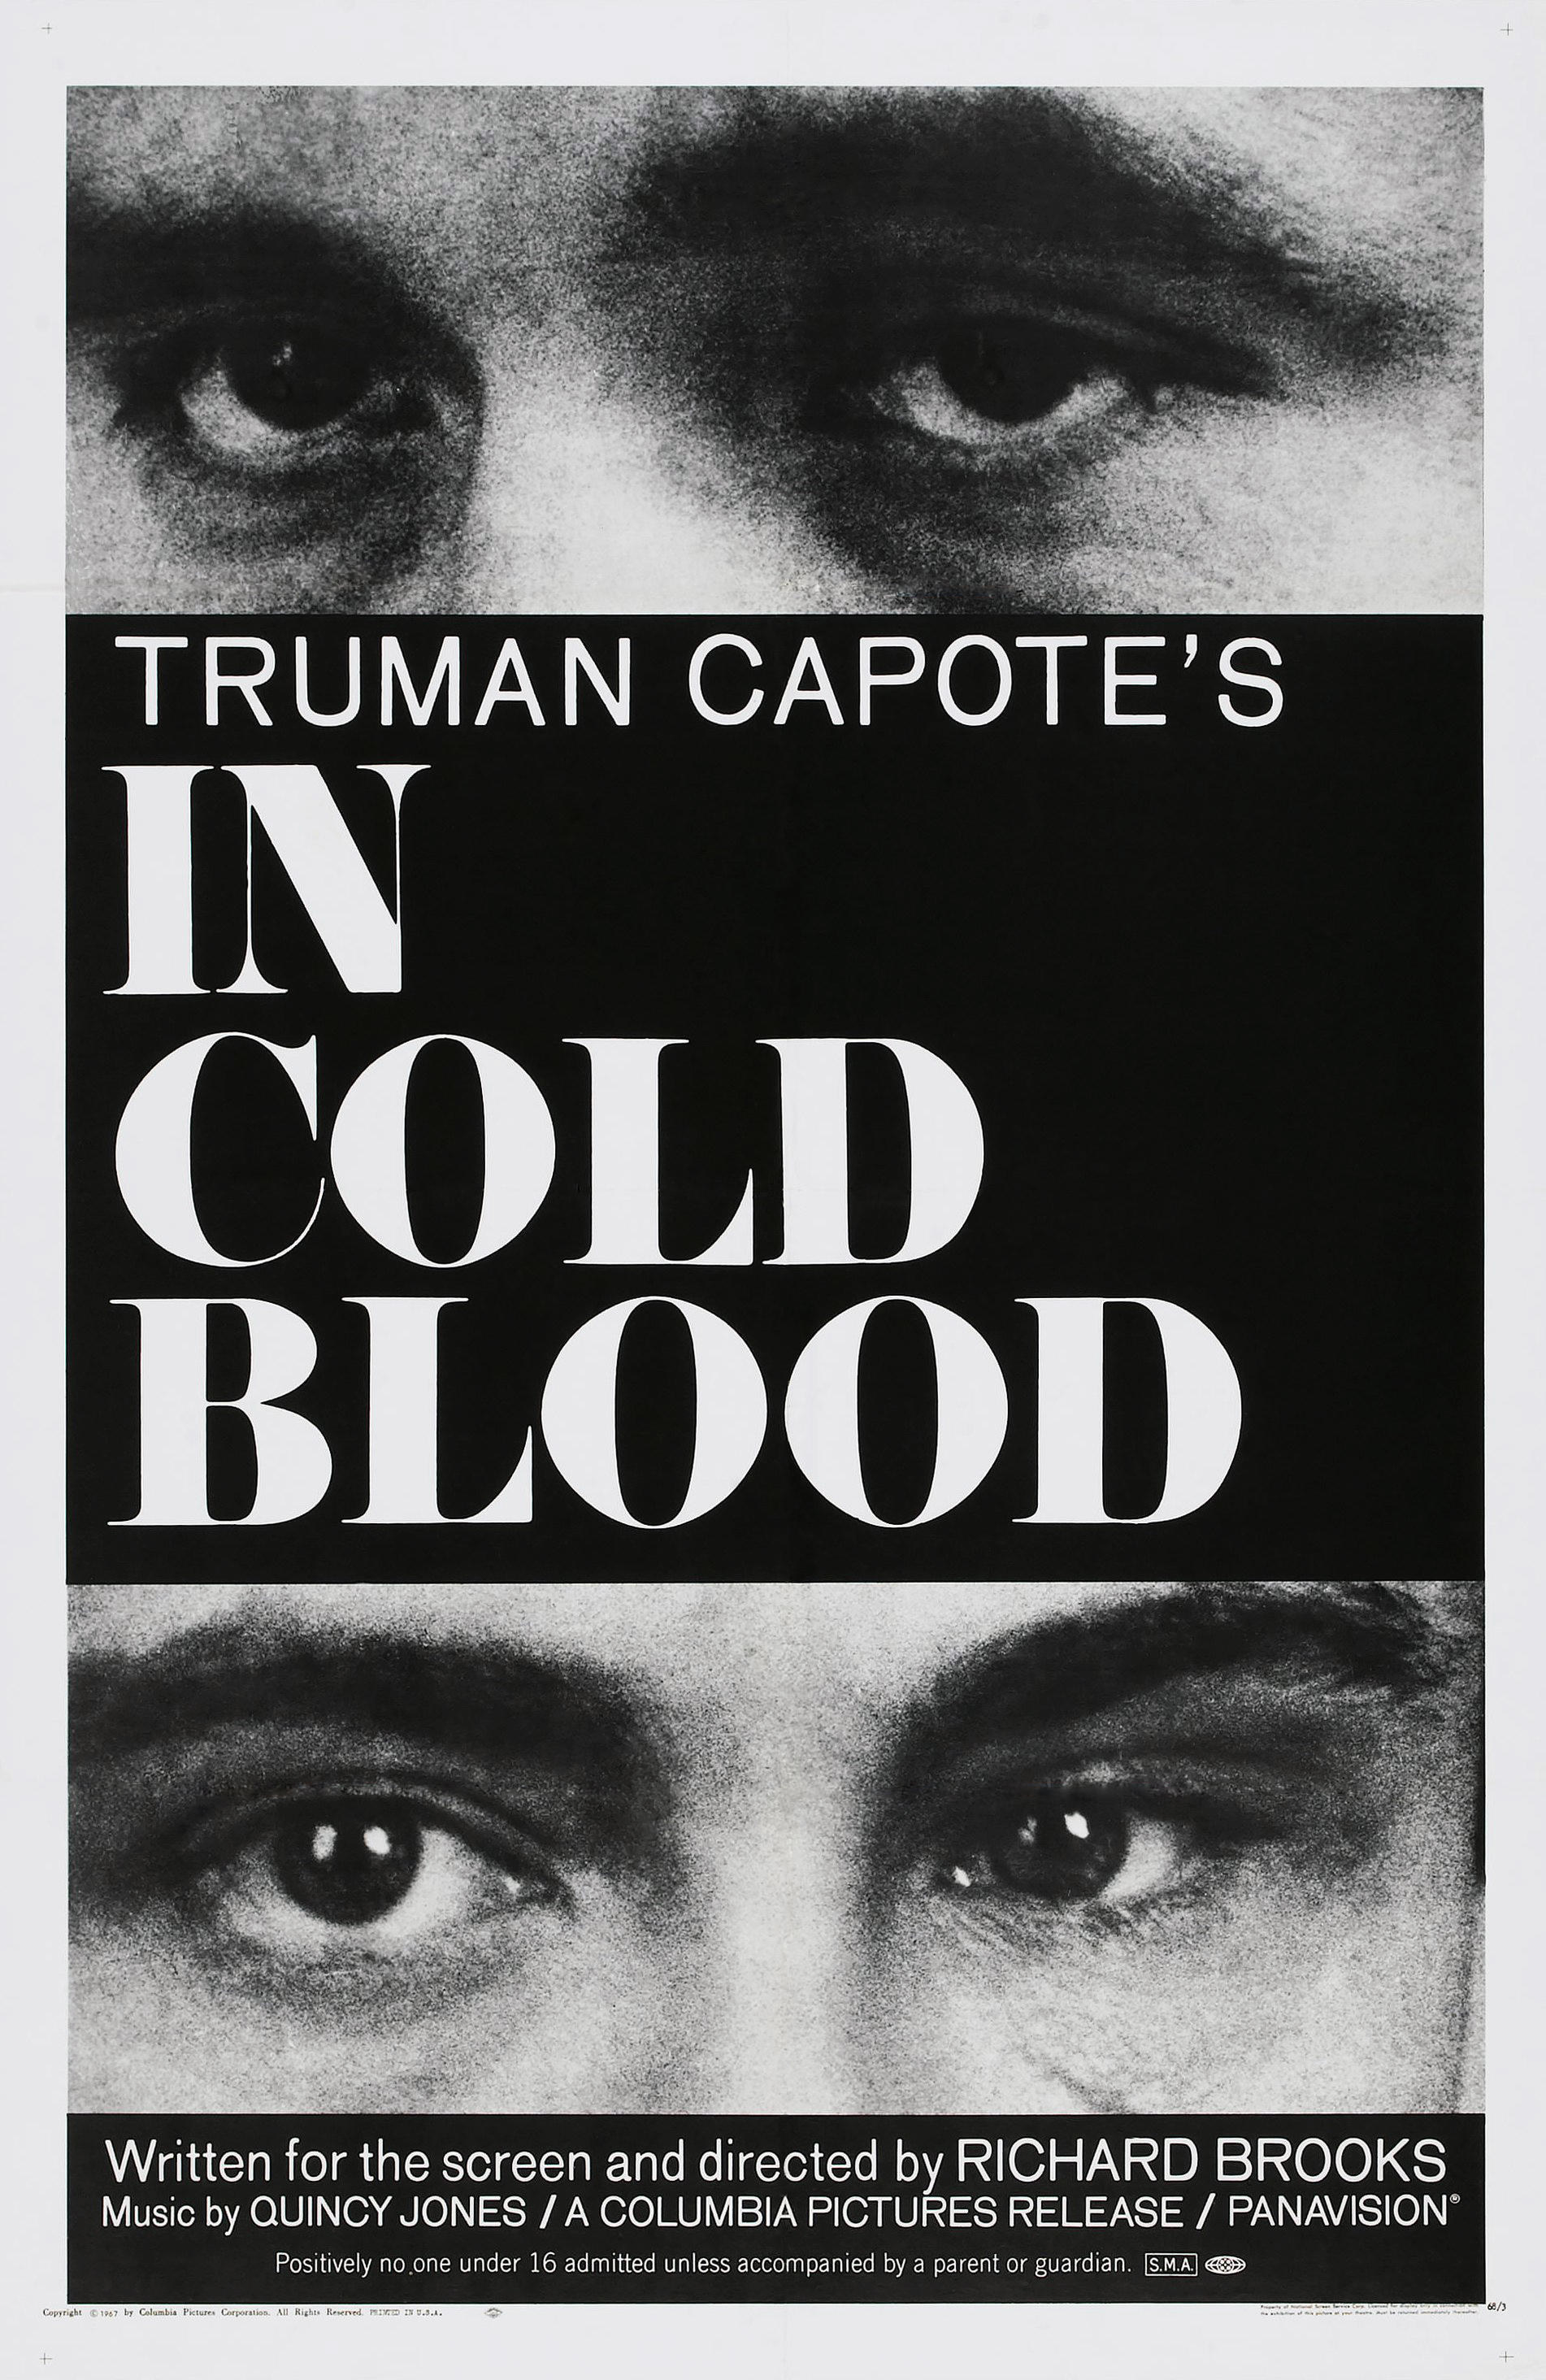 Poster image for the movie &quot;In Cold Blood&quot; showing the eyes of the killers separated by the title card in large white block letters